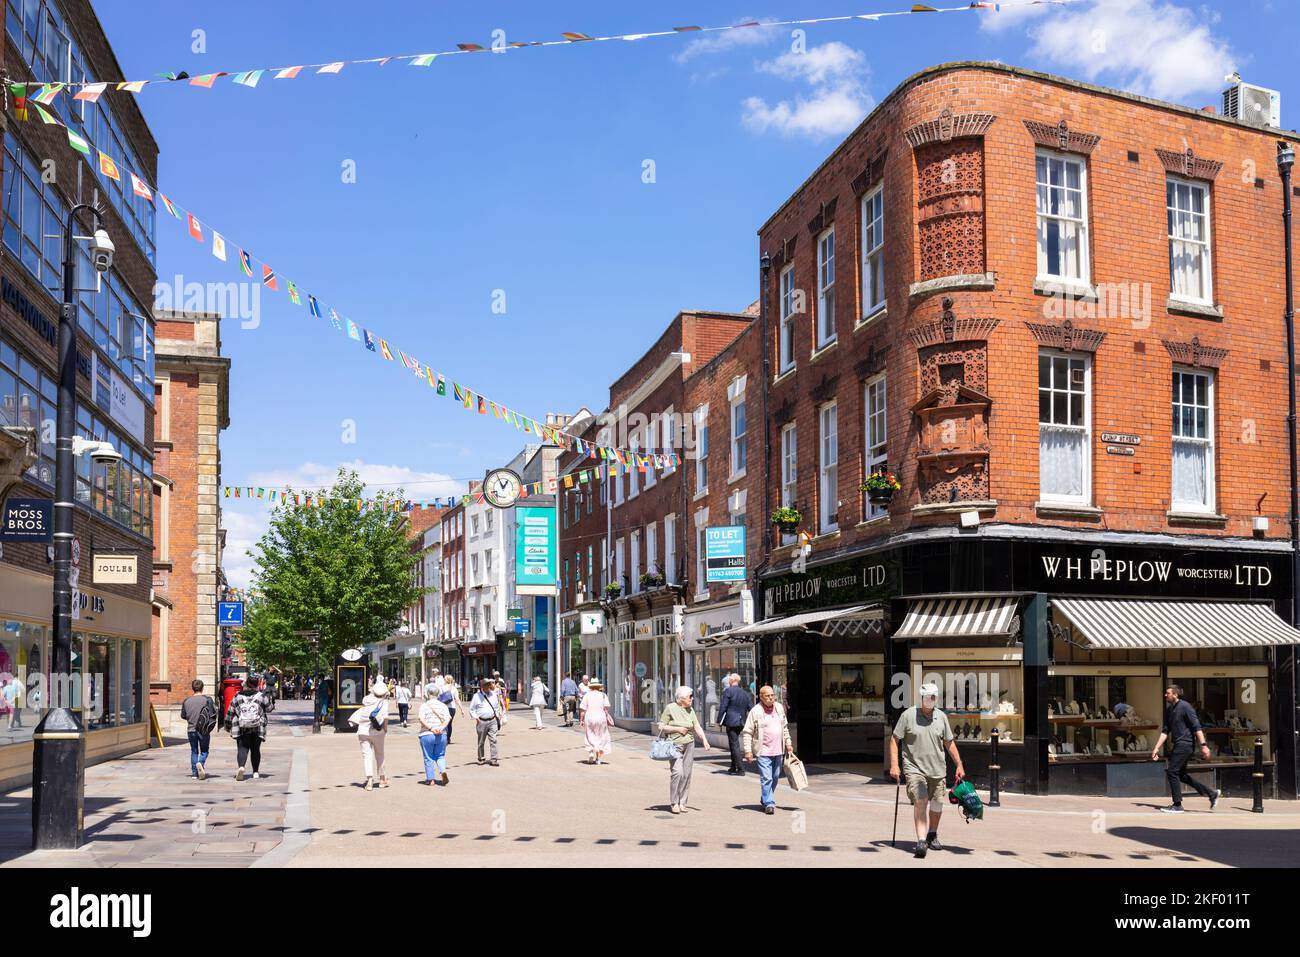 Worcester city centre shops and people on the High street in Worcester Worcestershire England UK GB Europe Stock Photo